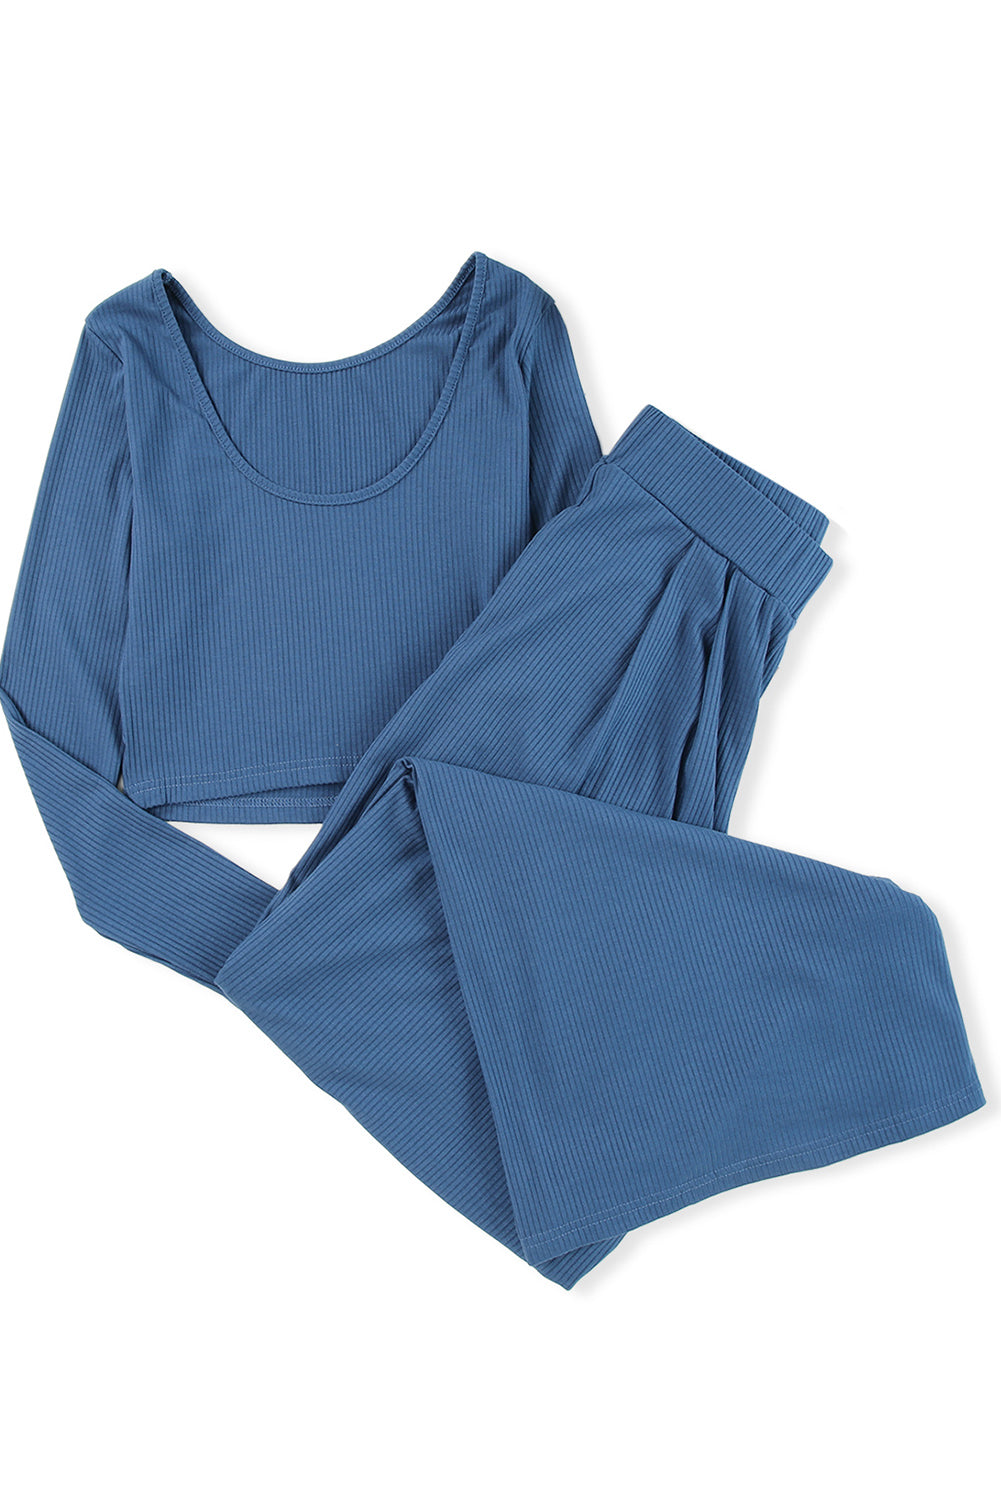 LC625150-5-S, LC625150-5-M, LC625150-5-L, LC625150-5-XL, Blue Solid Color Ribbed Crop Top Long Pants Set